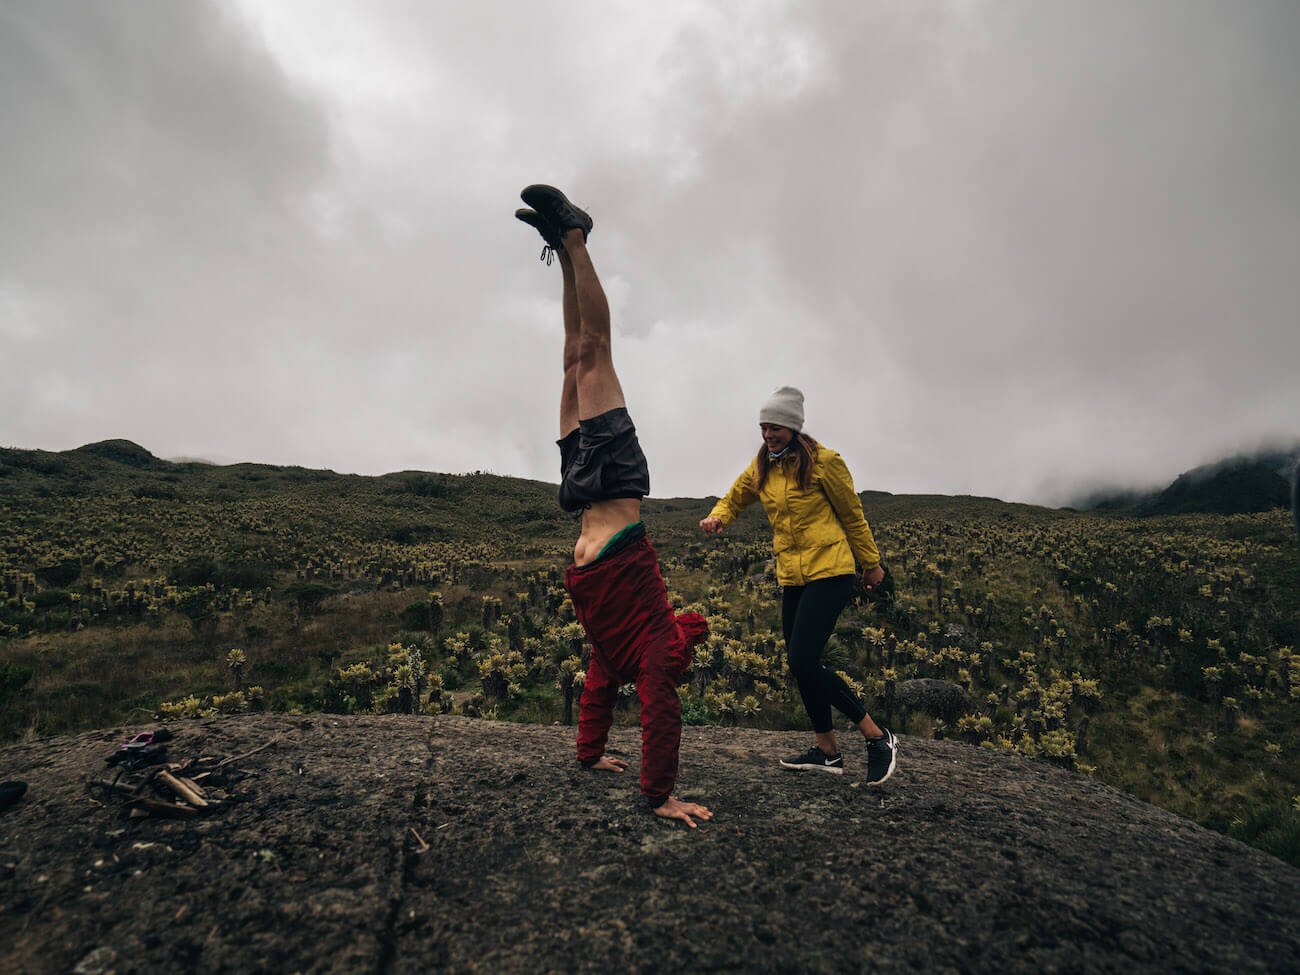 Chris doing handstand on a boulder in the Colombian paramo